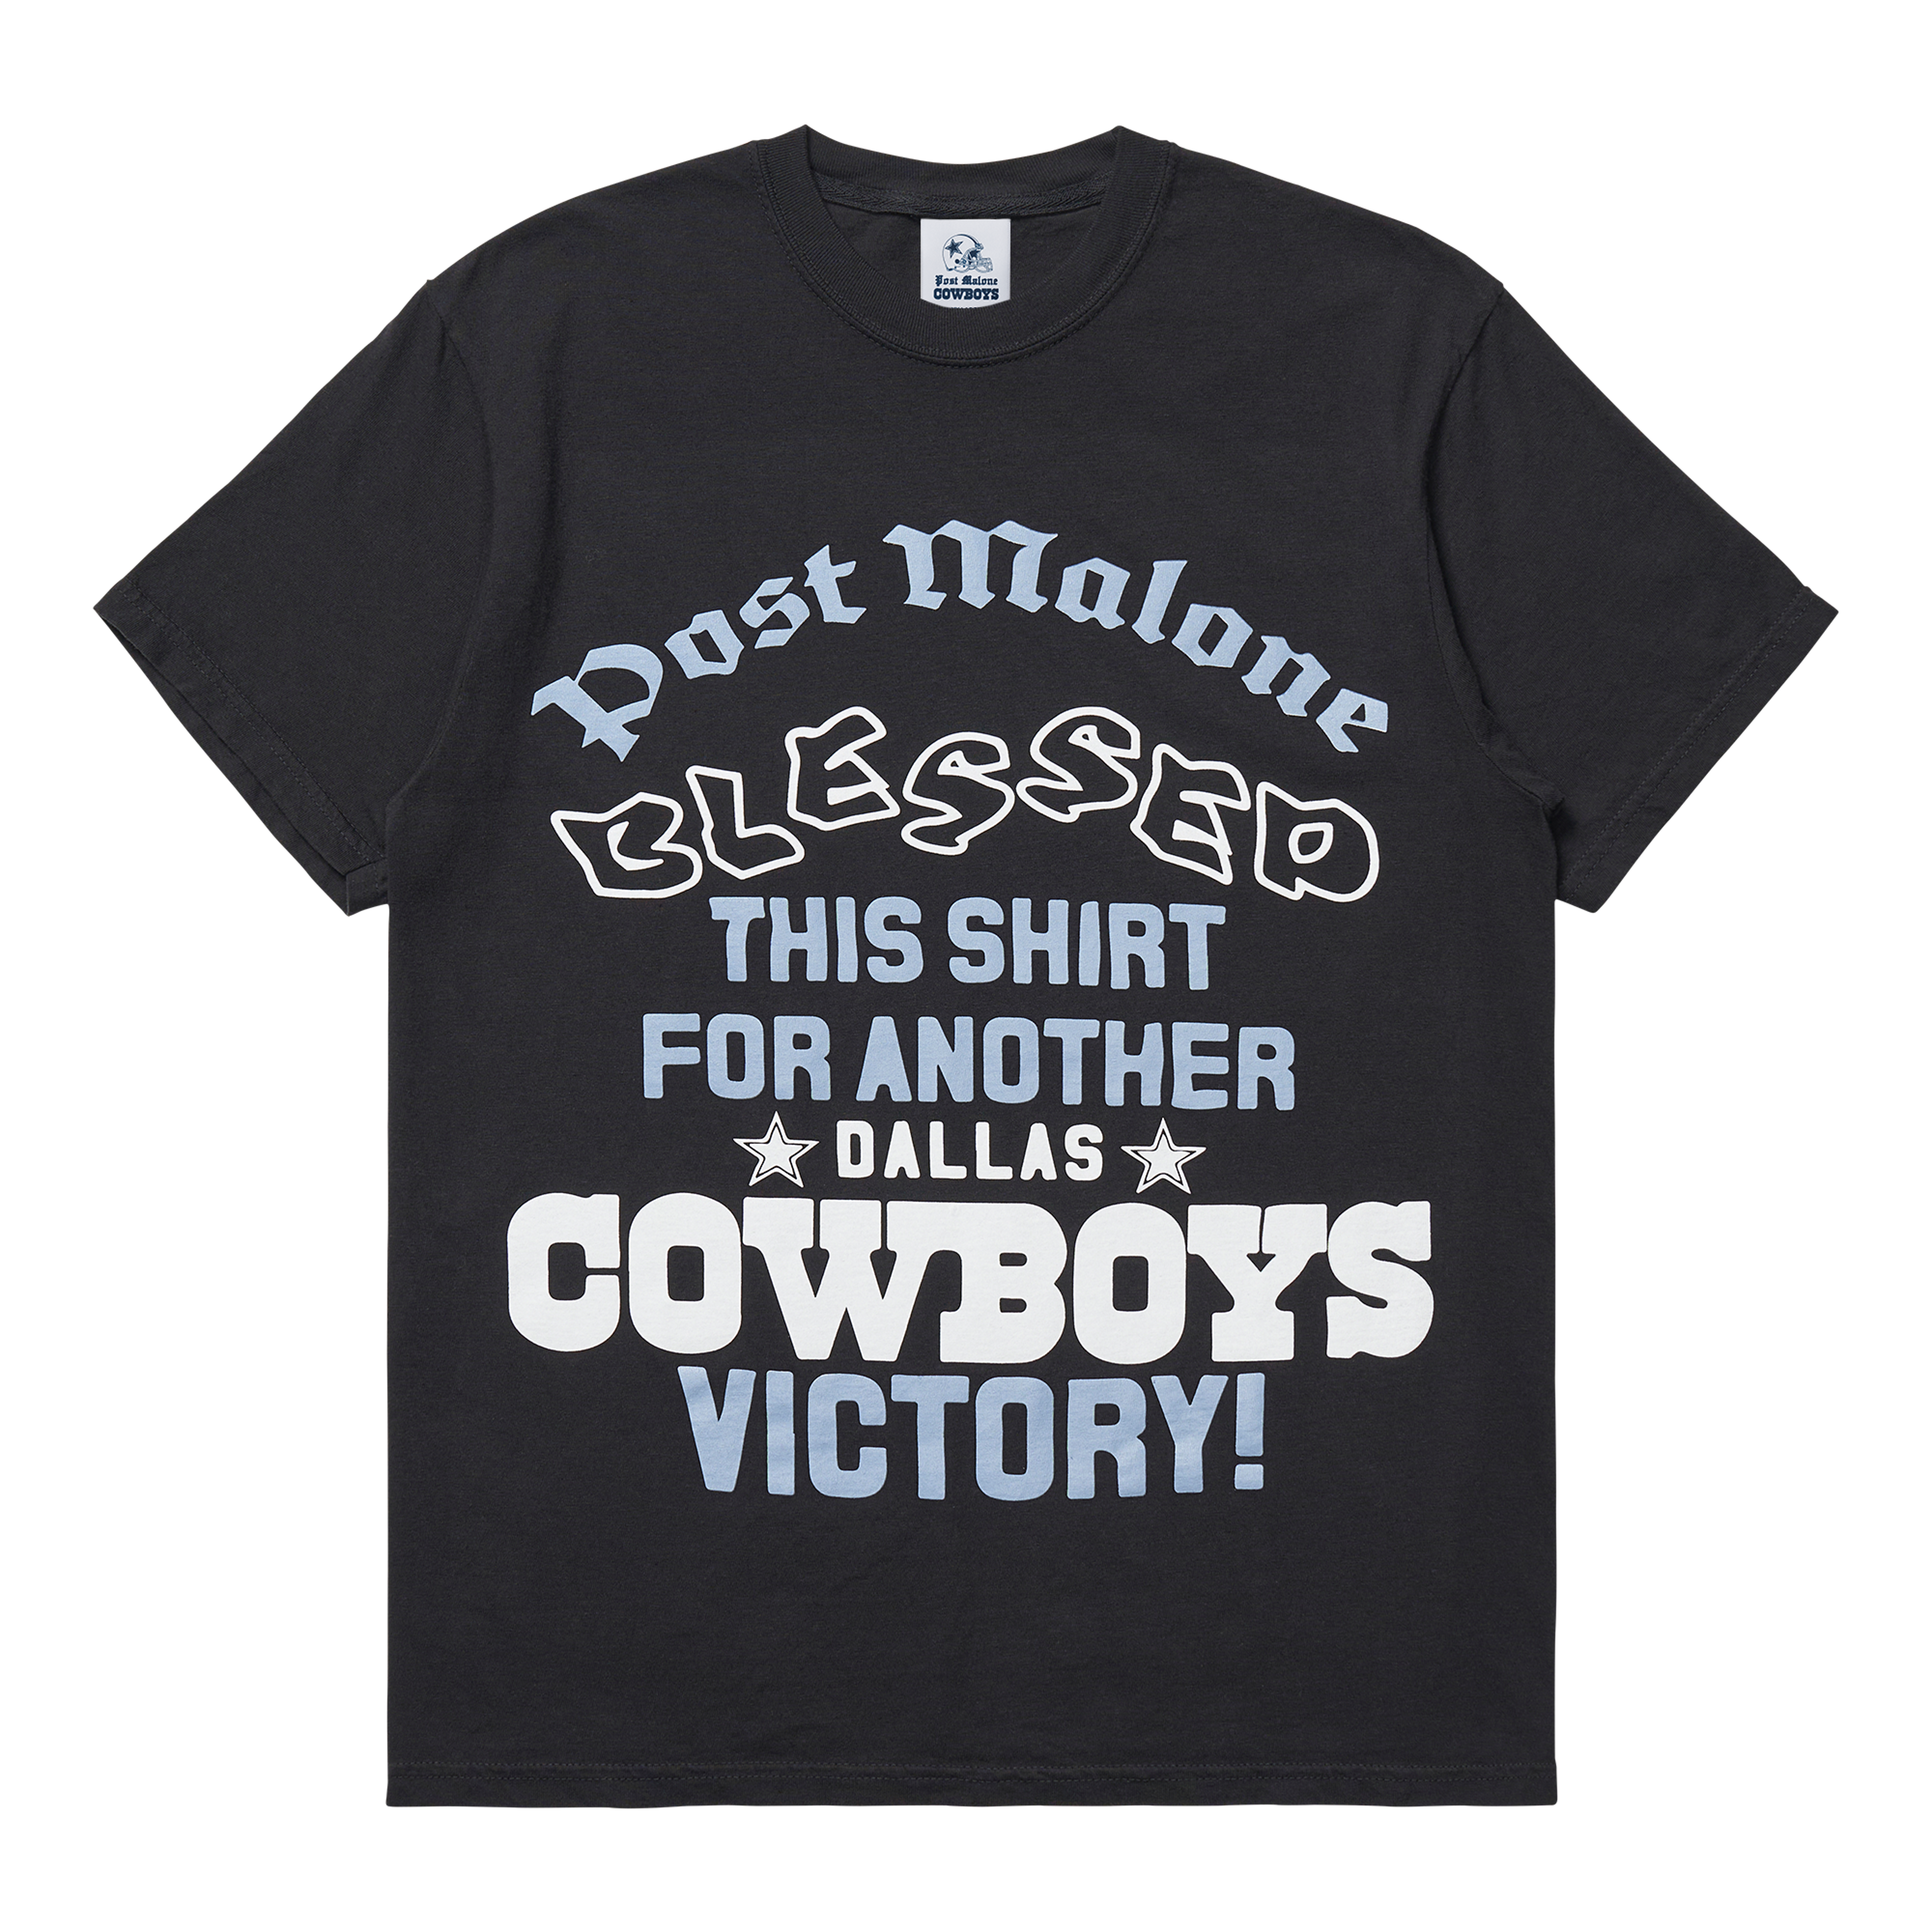 Post Malone + Dallas Cowboys Blessed Tee